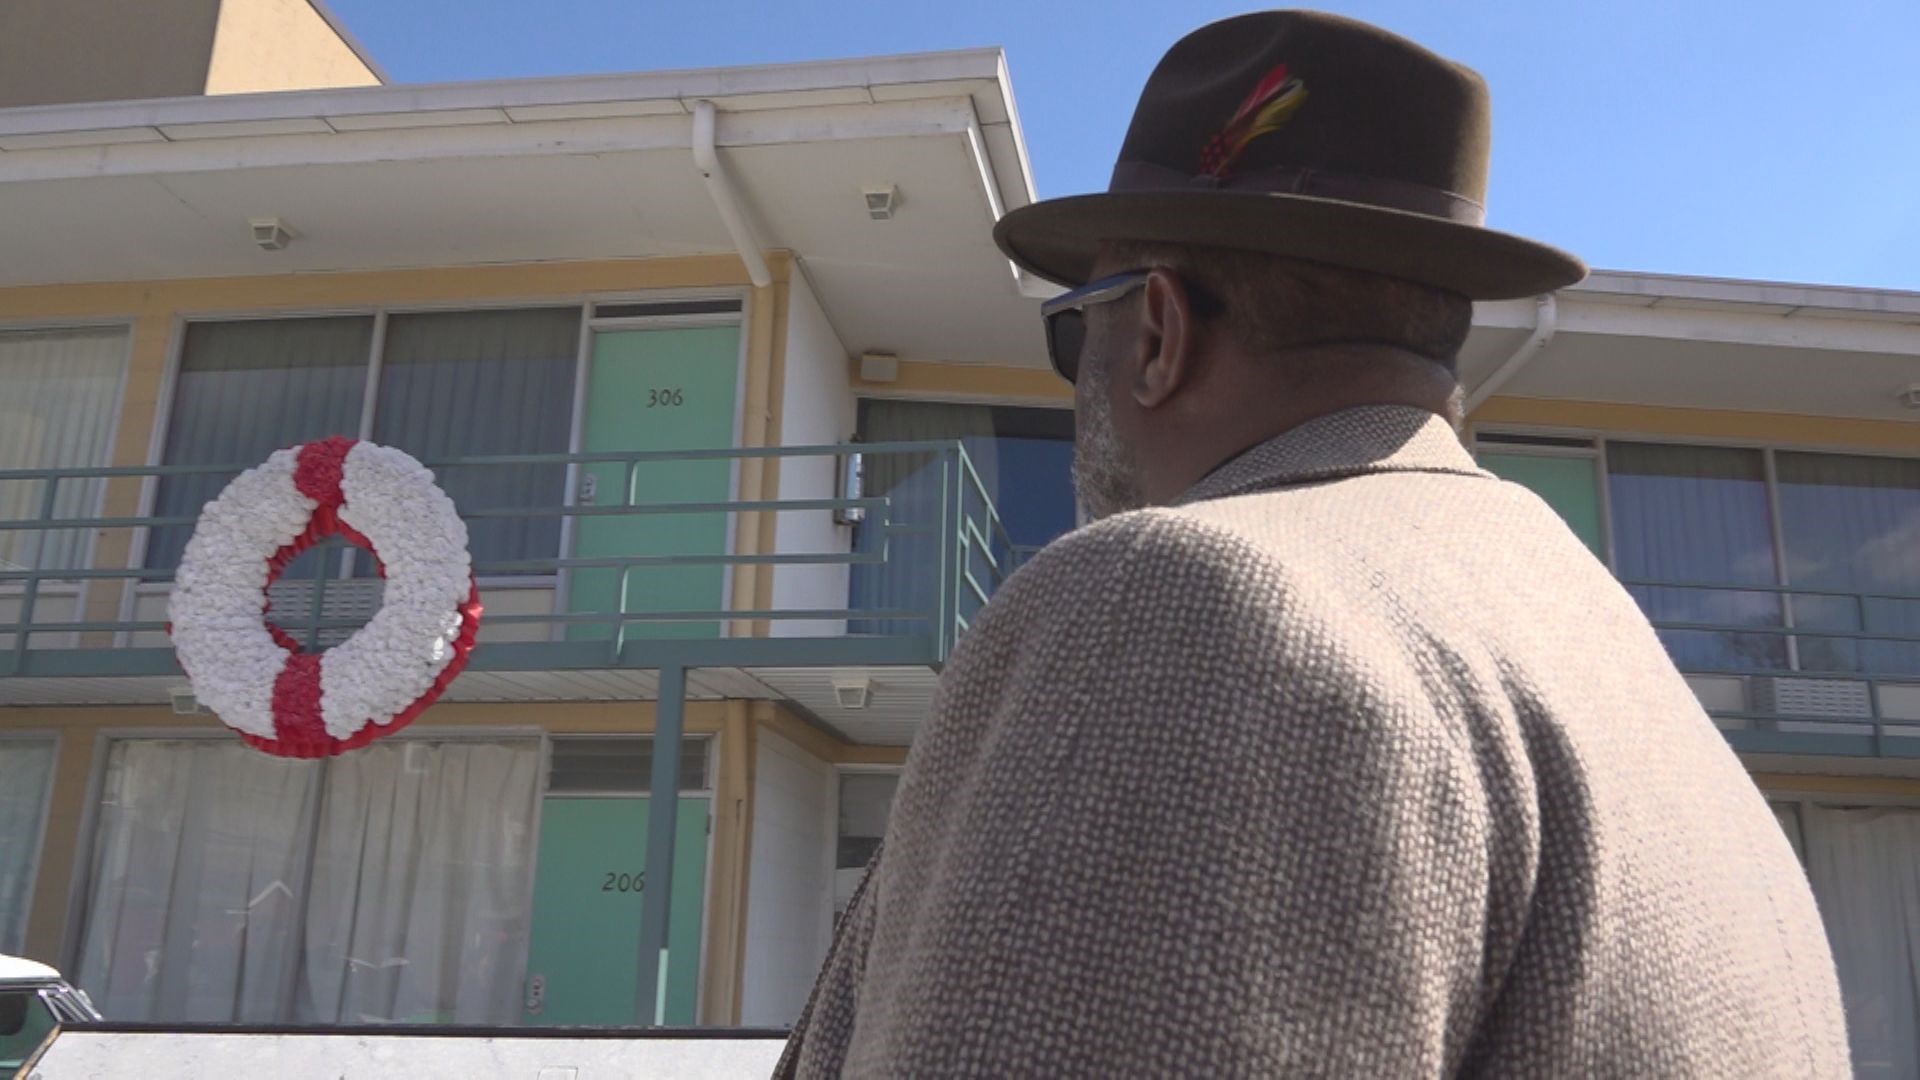 House Representative Joe Towns grew up a block away from the Lorraine Motel and was in his grandmother's house when he heard that historic shot on April 4th, 1968.